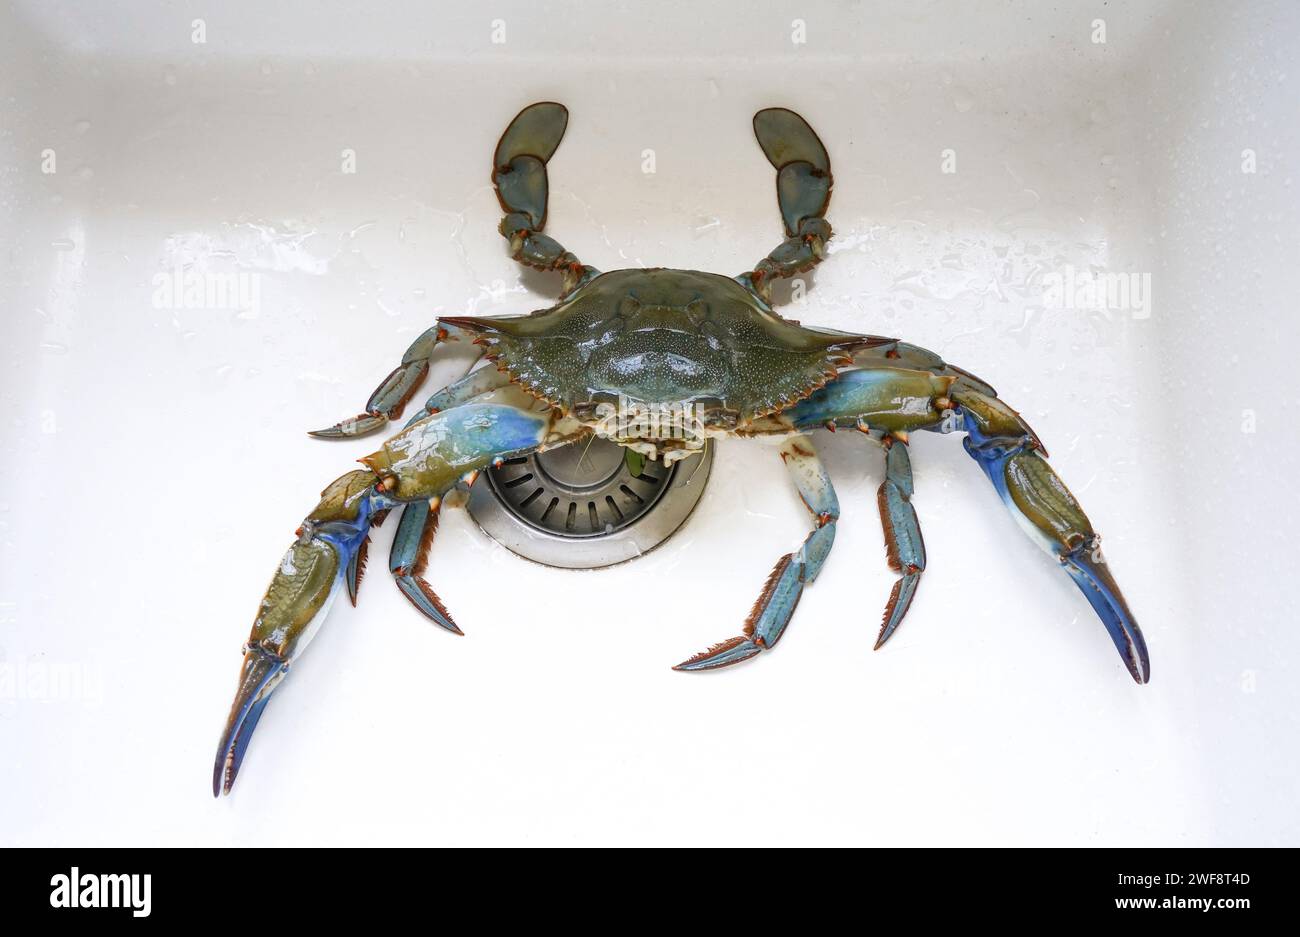 A live blue crab in a sink before being cooked. Stock Photo